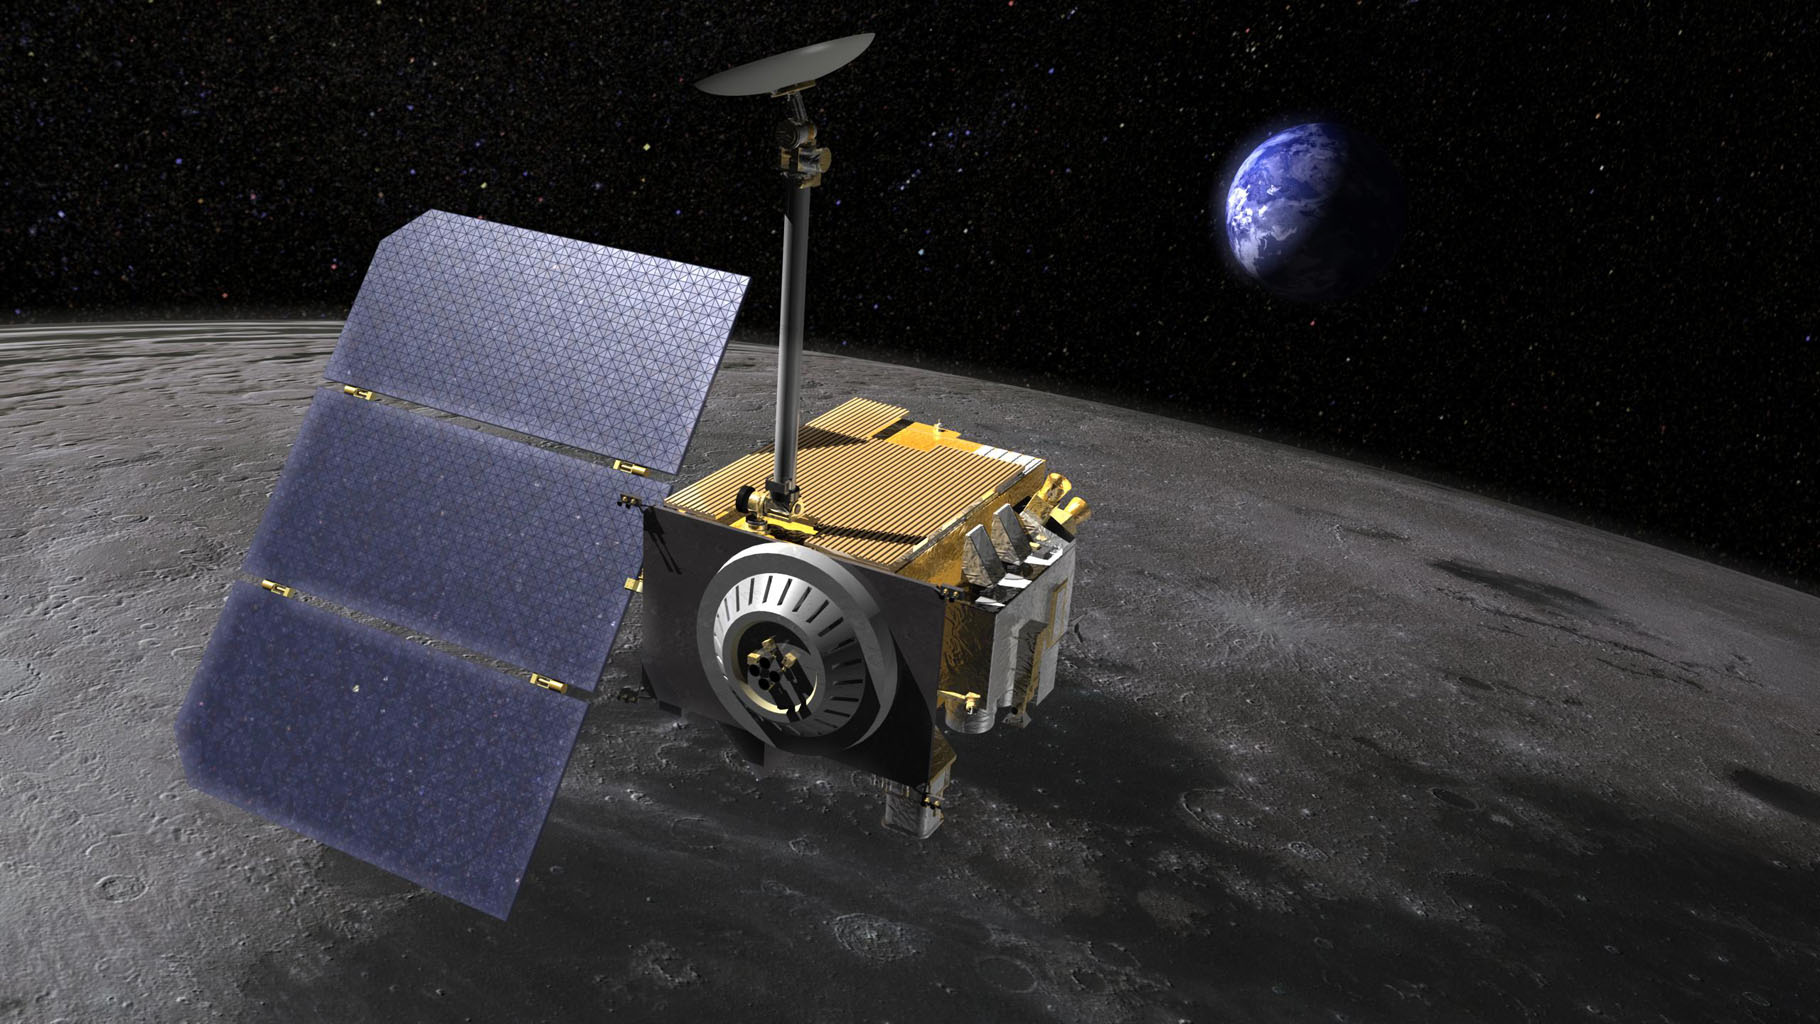 The Lunar Reconnaissance Orbiter, shown in this artist's concept, carries seven instruments to explore the Moon's surface. 